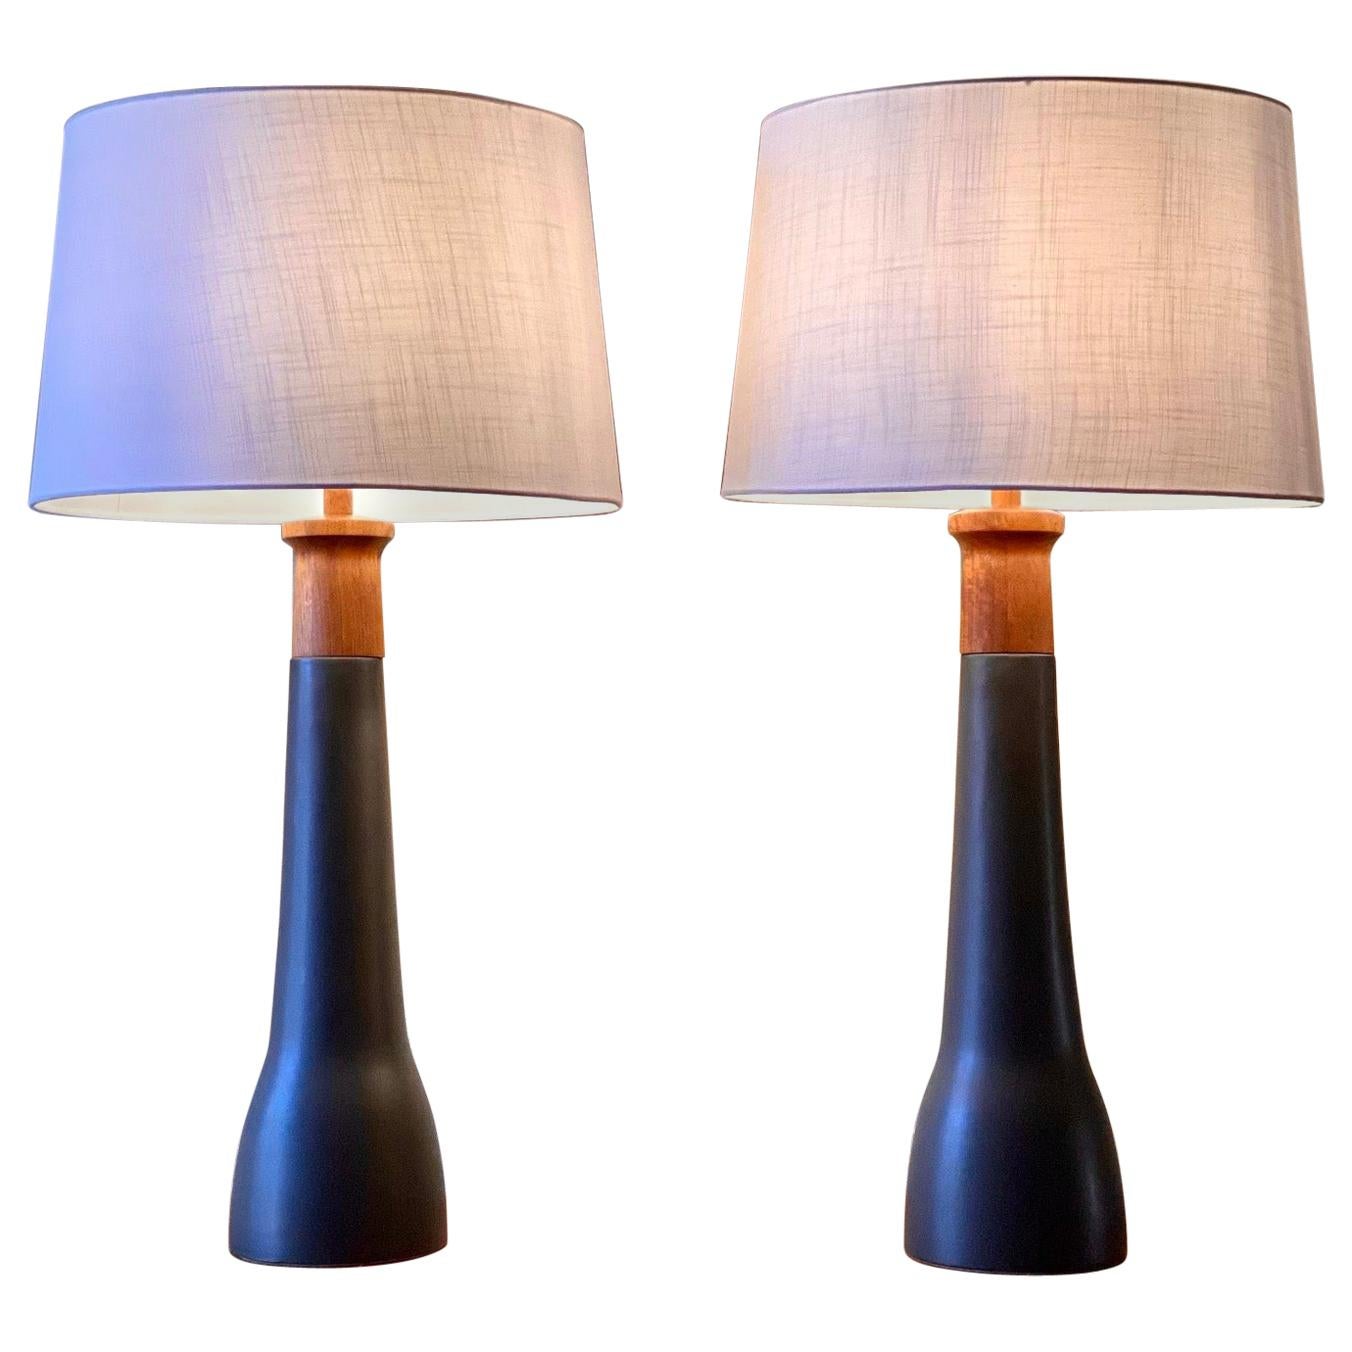 Vintage 1960s Pair of Gordon and Jane Martz Black Ceramic and Walnut Table Lamps